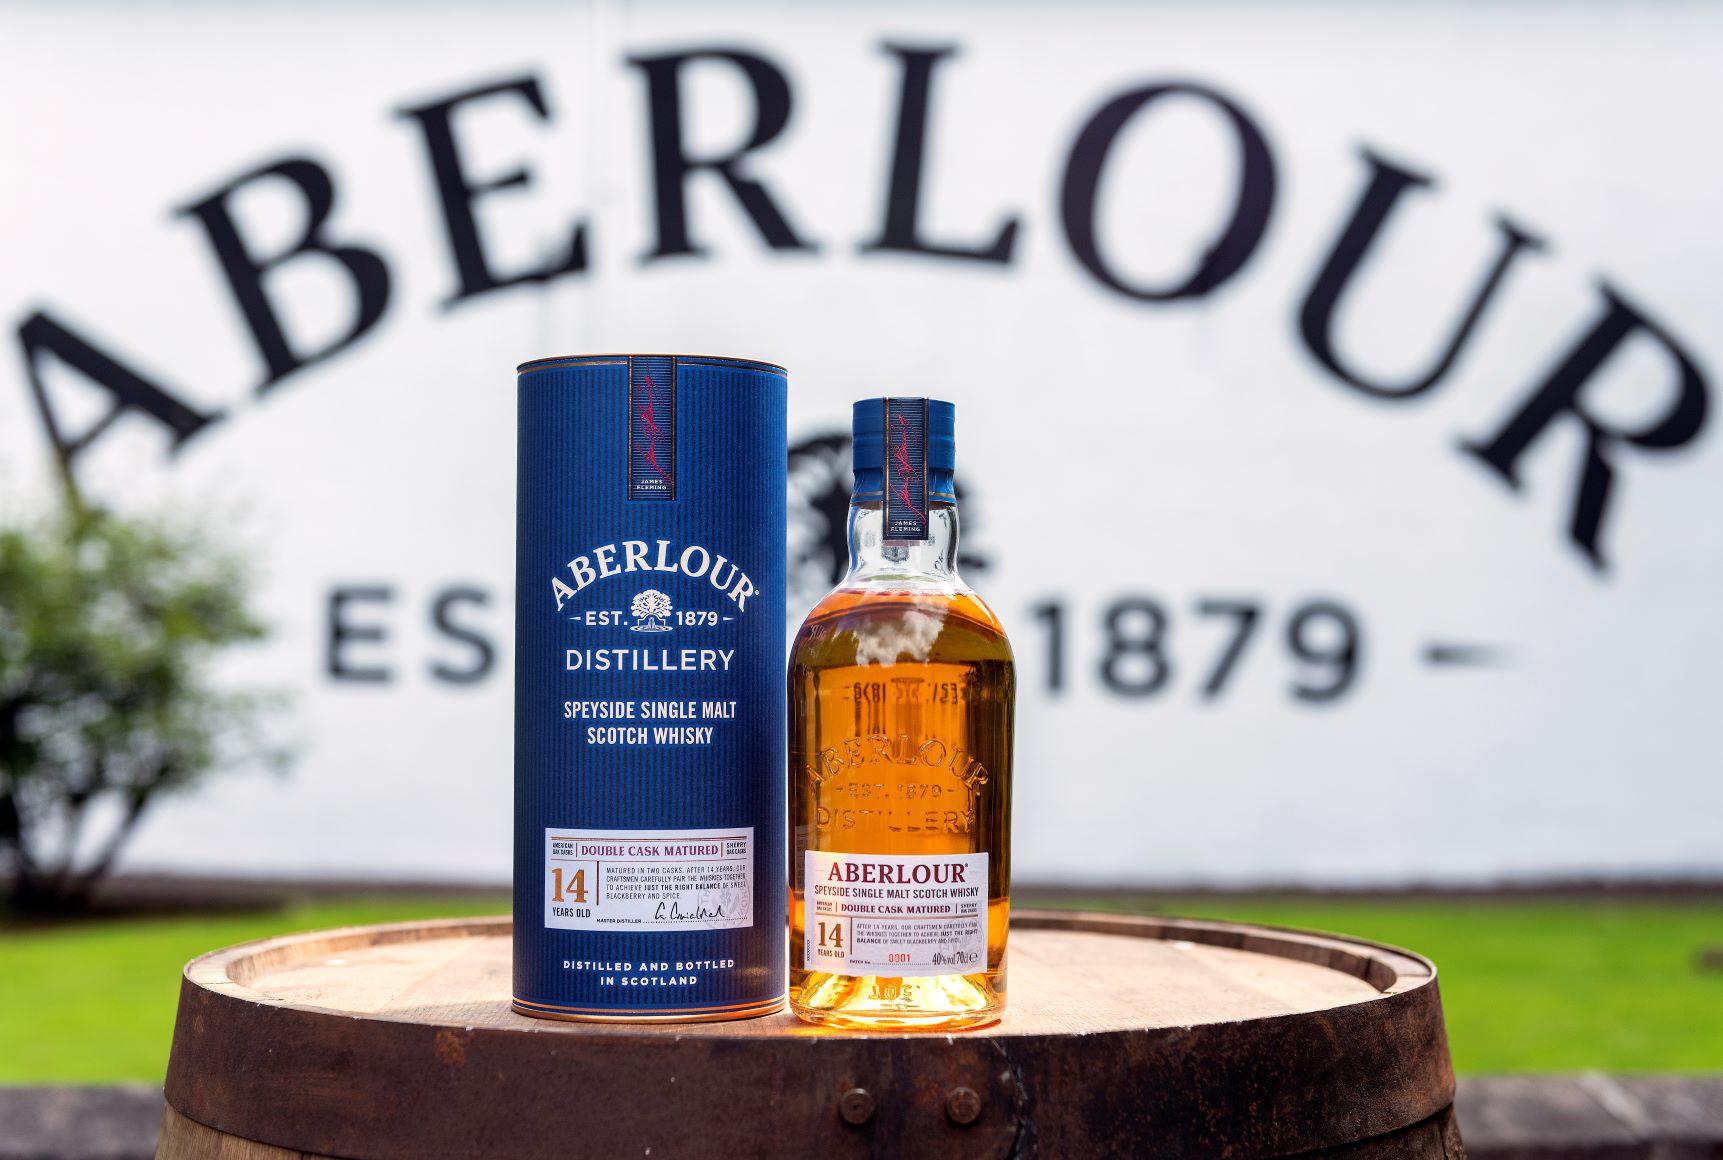 New Arrival of the Week: Aberlour 14 Year Old Double Cask